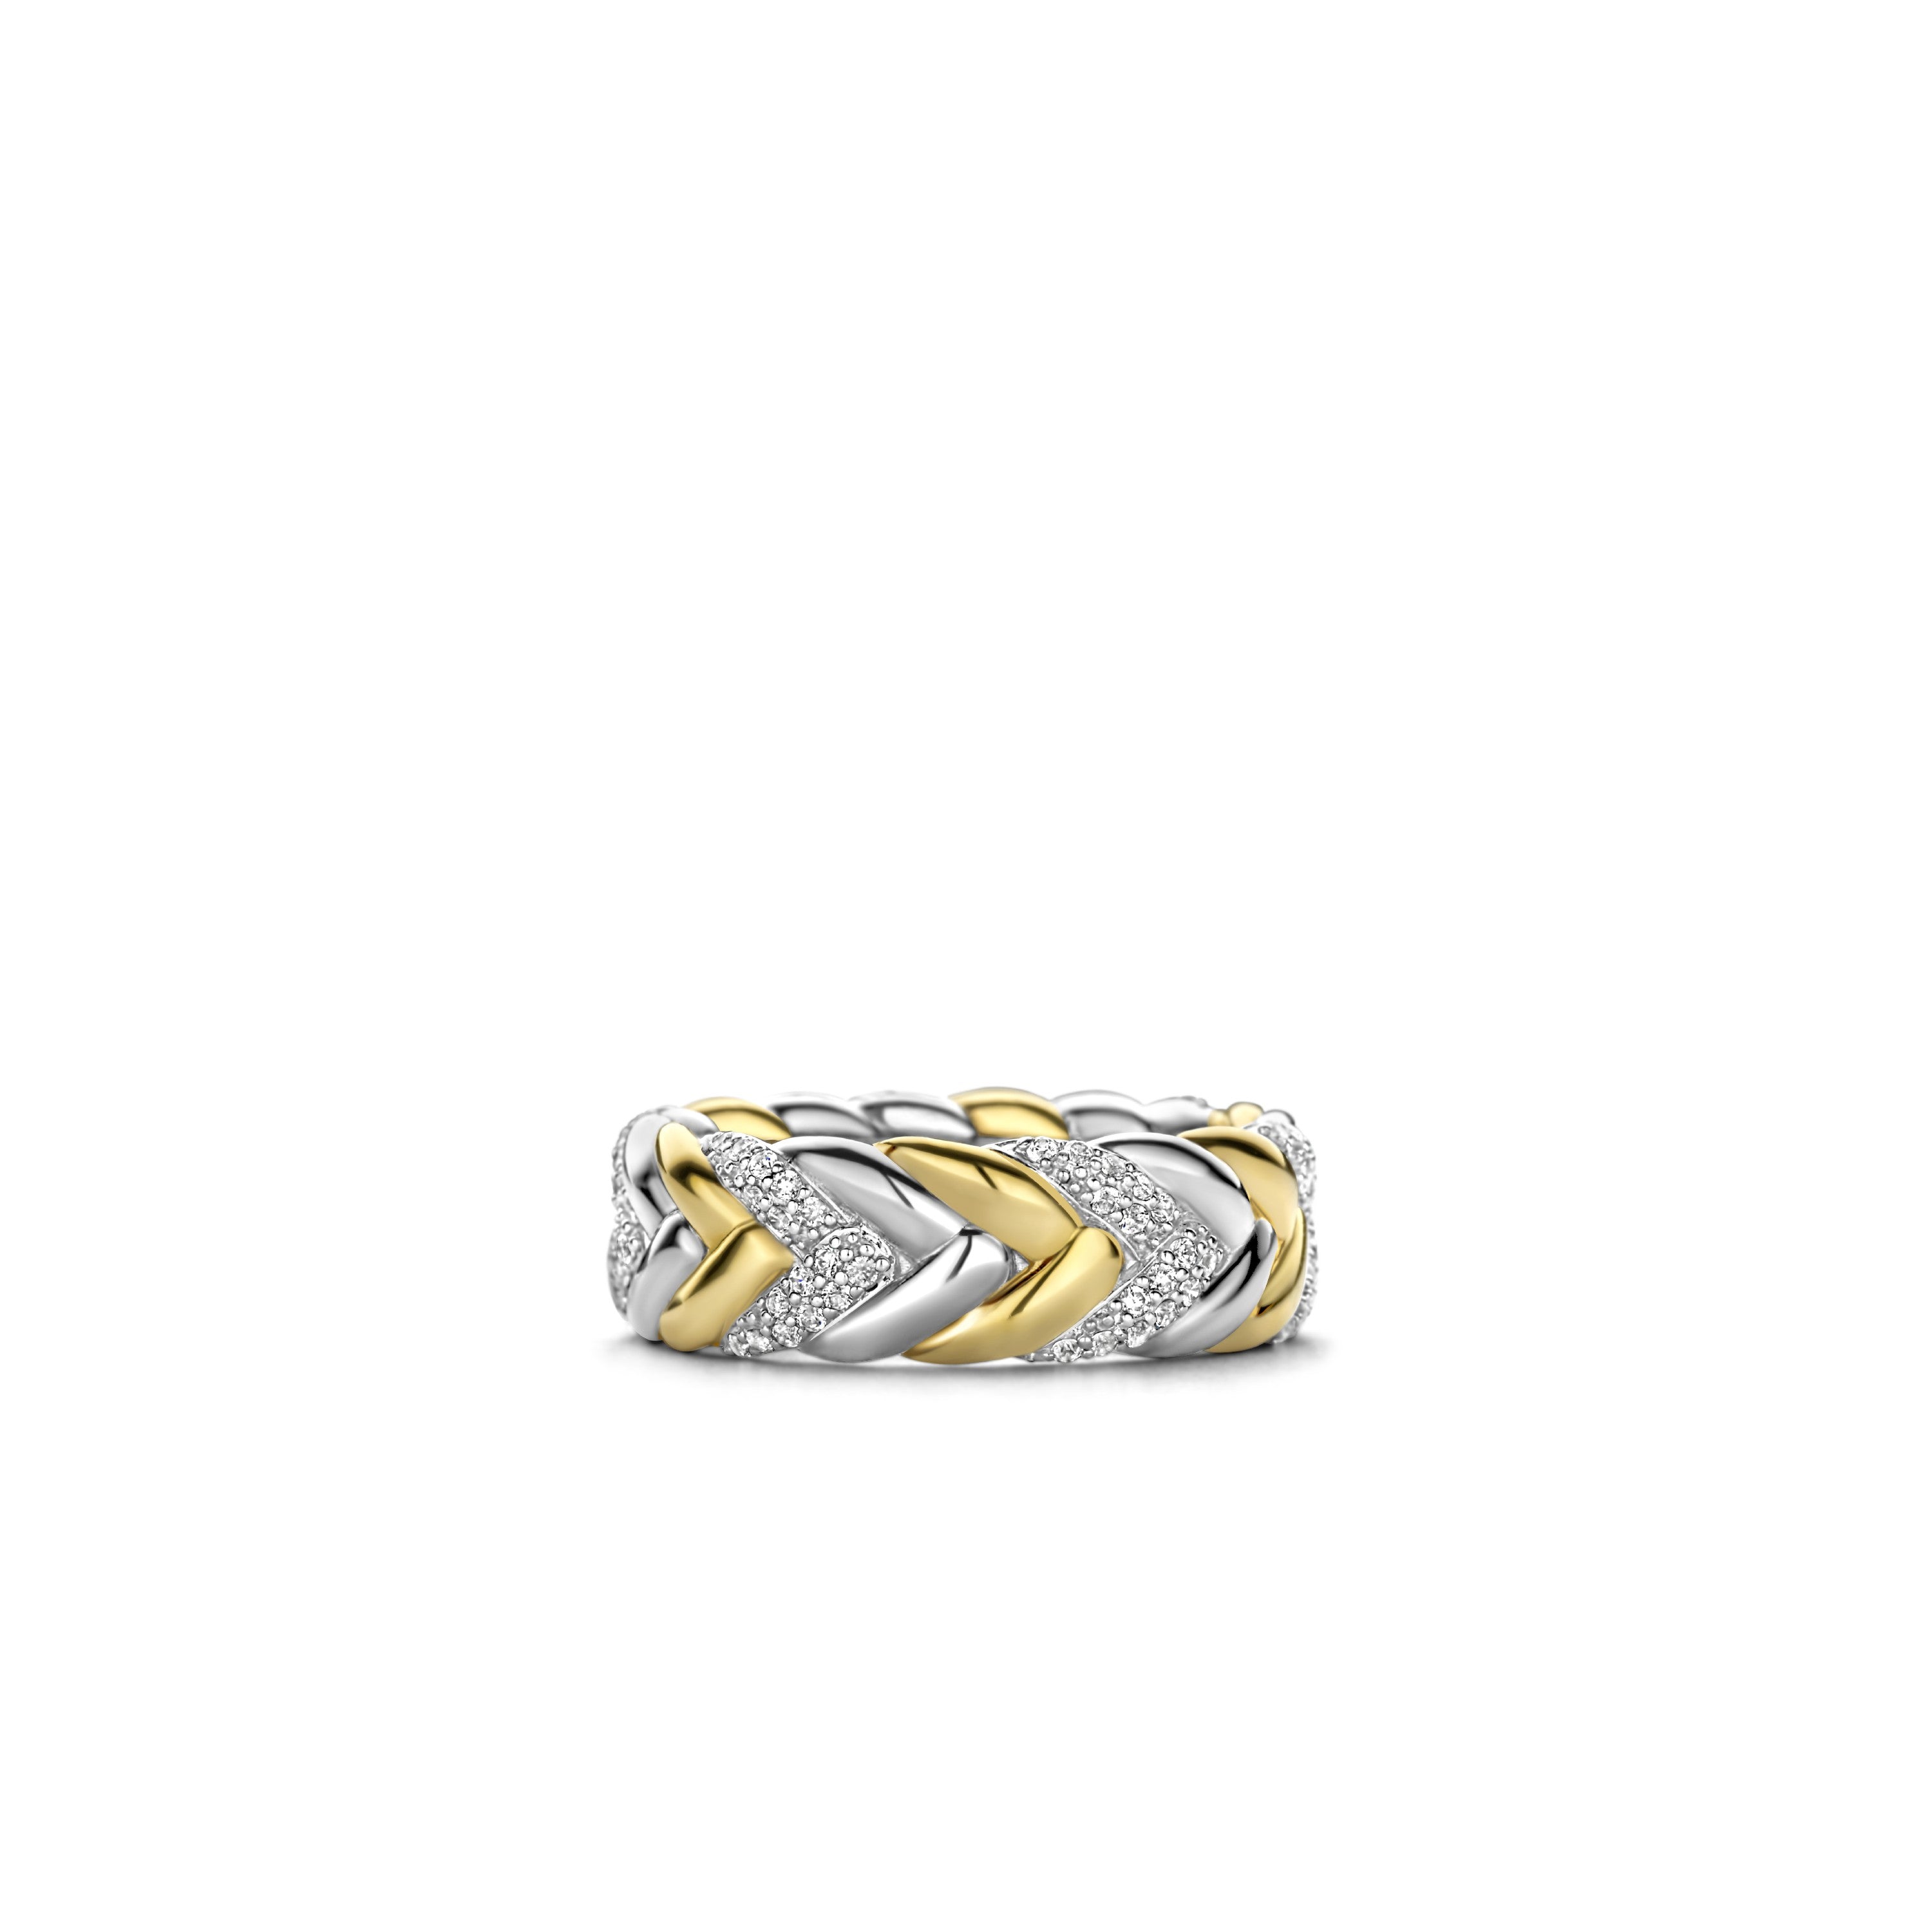 Tisento Milano Sterling Silver gold plated Zirconia white yellow gold platedRing Finger Size 7.75